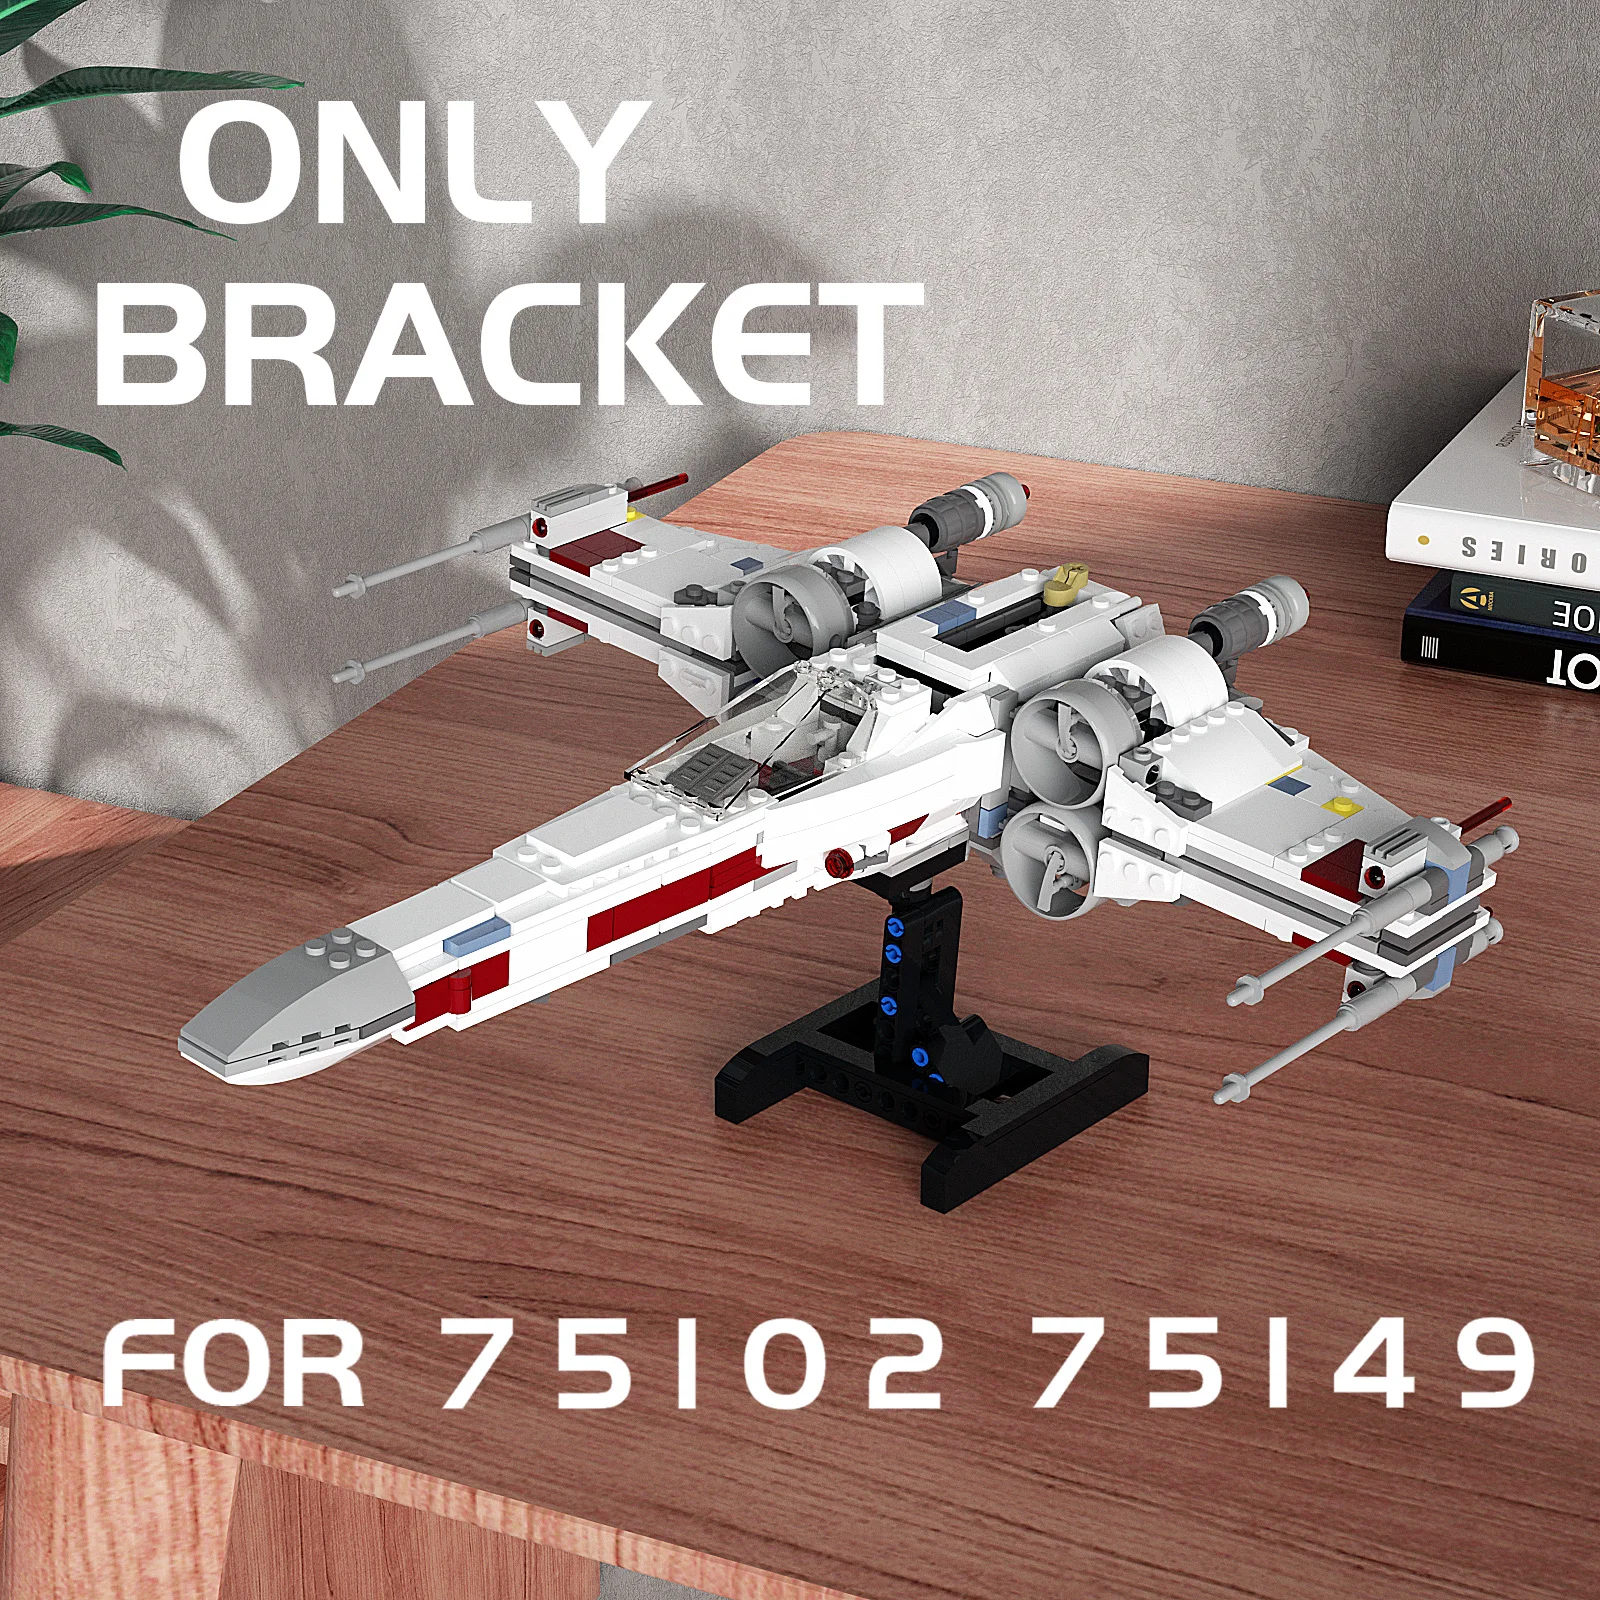 

MOC Stand (Only Bracket) Building Blocks for The Space Wars X-wing Fighter 75149/75218/75102 Display Support Bricks DIY Toy Gift